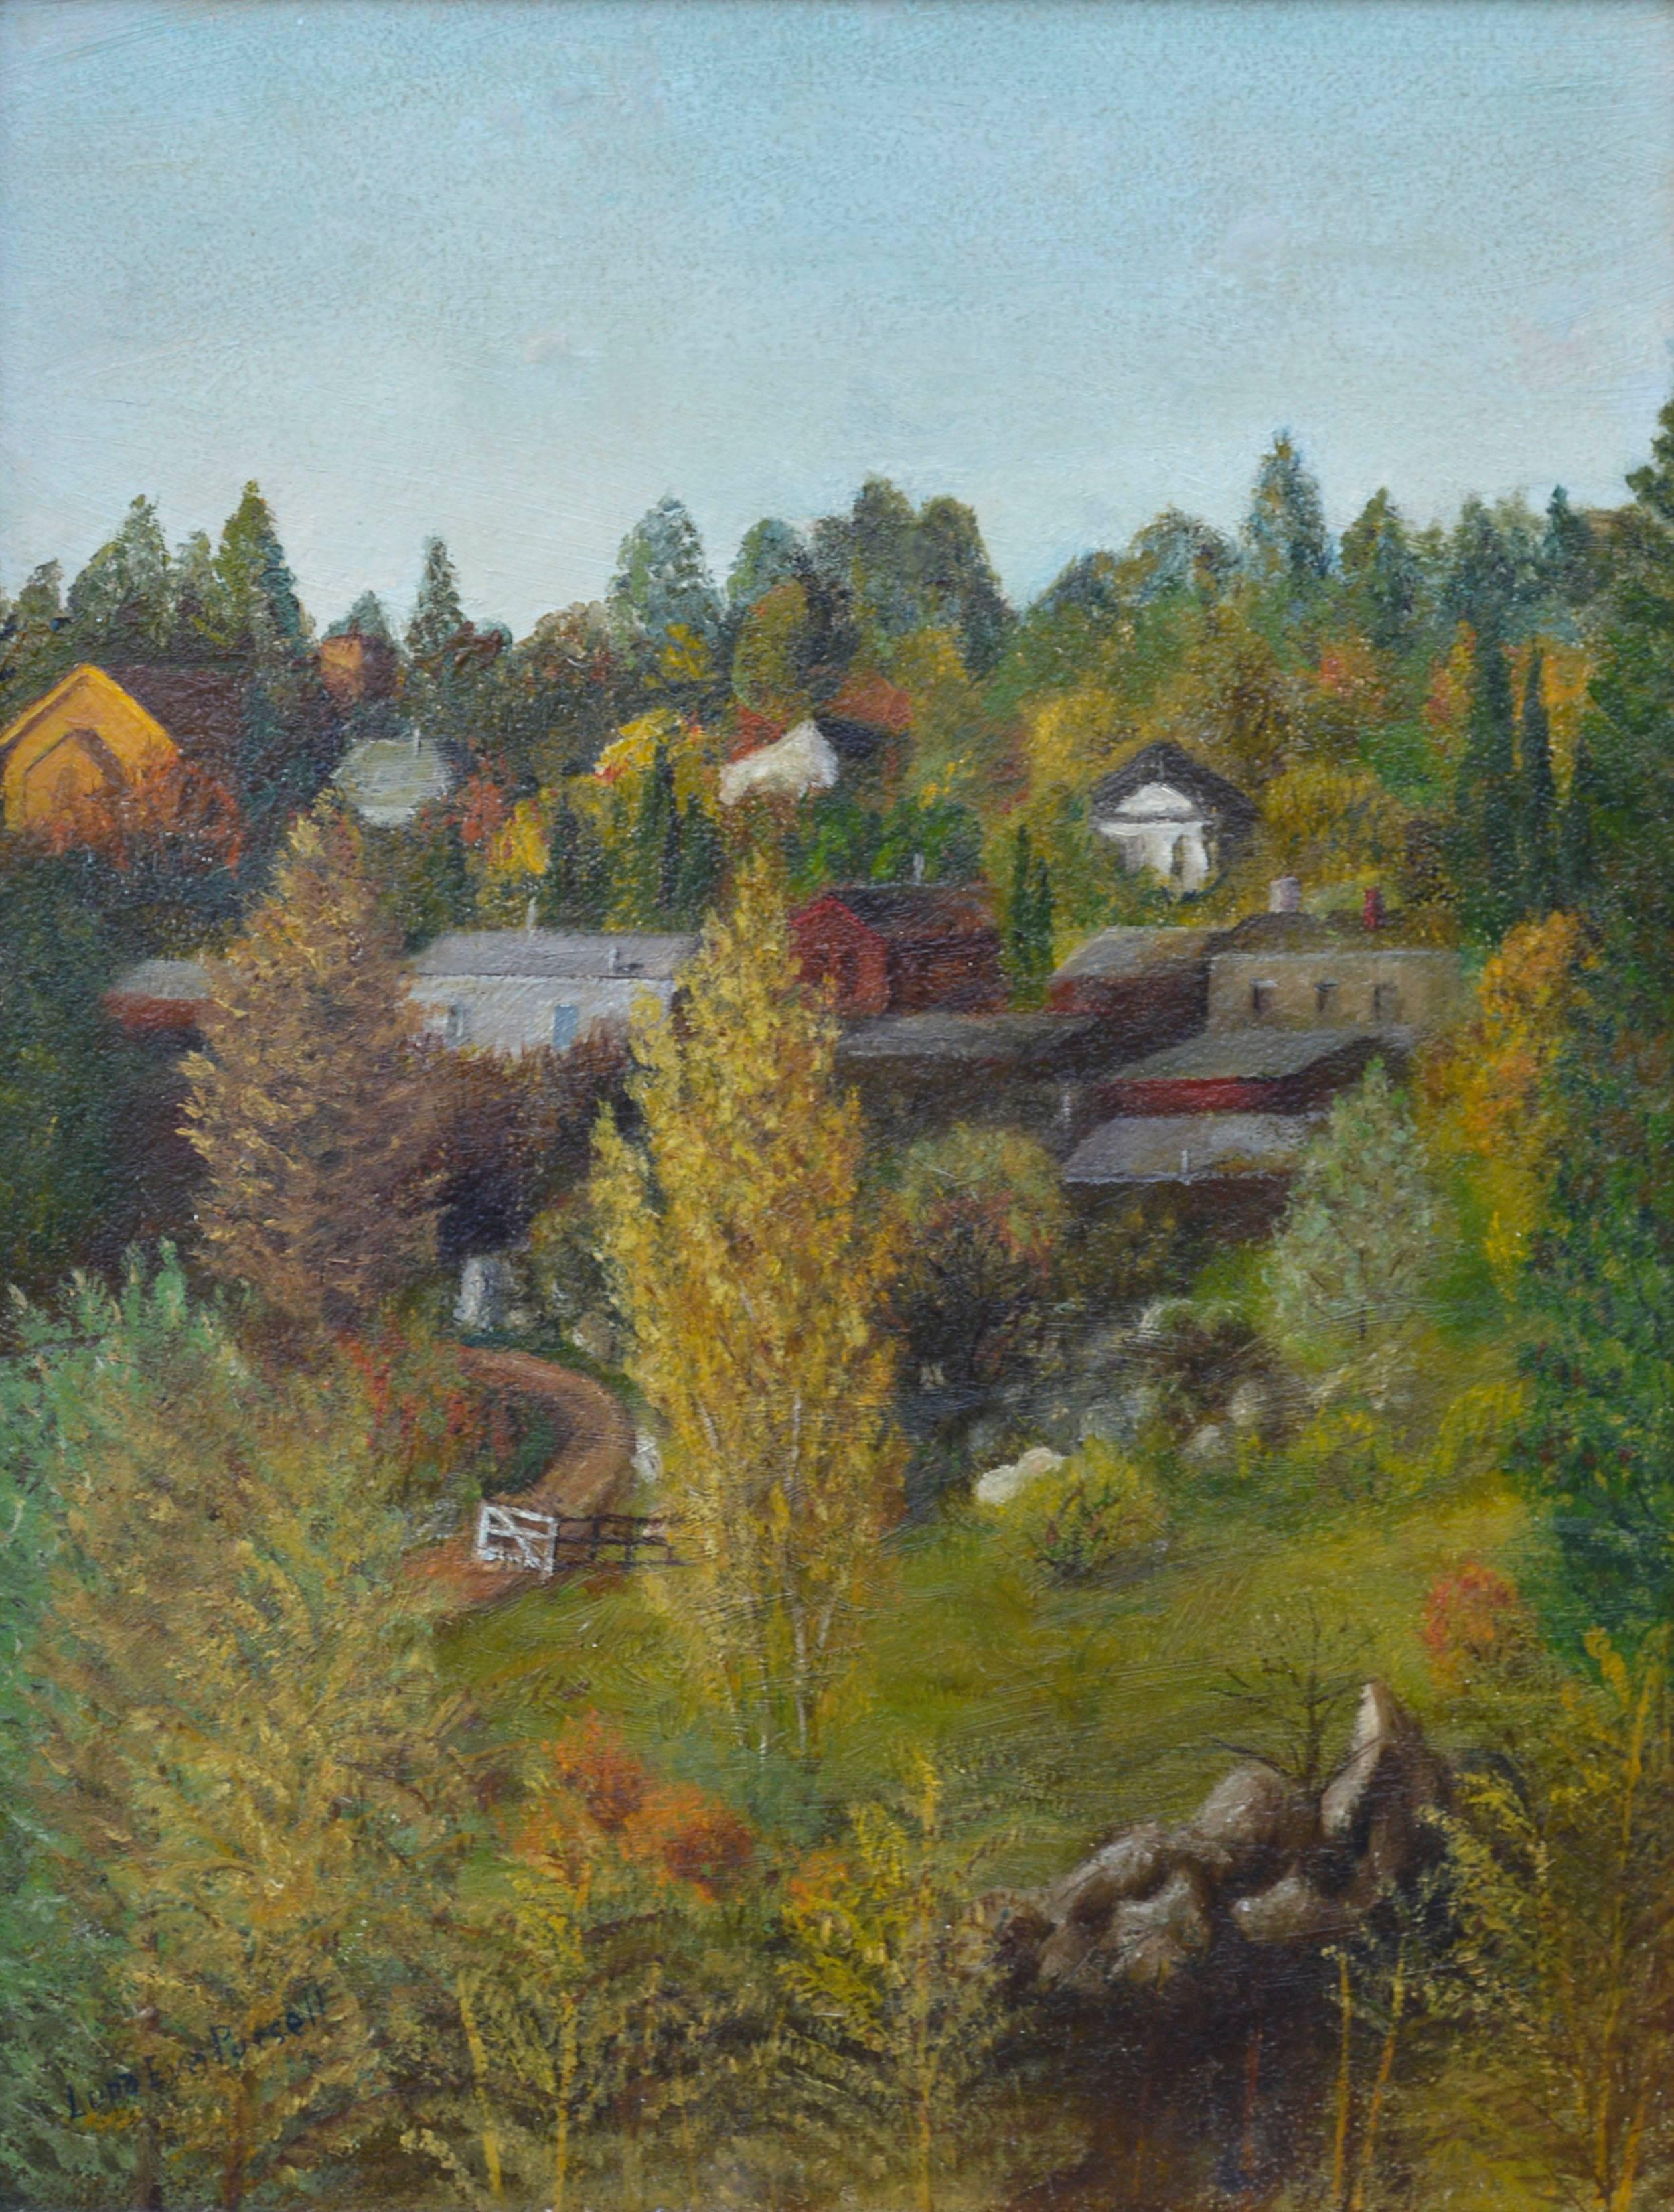 Lura Eva Pursell Landscape Painting - 1940s Small Foothill Town